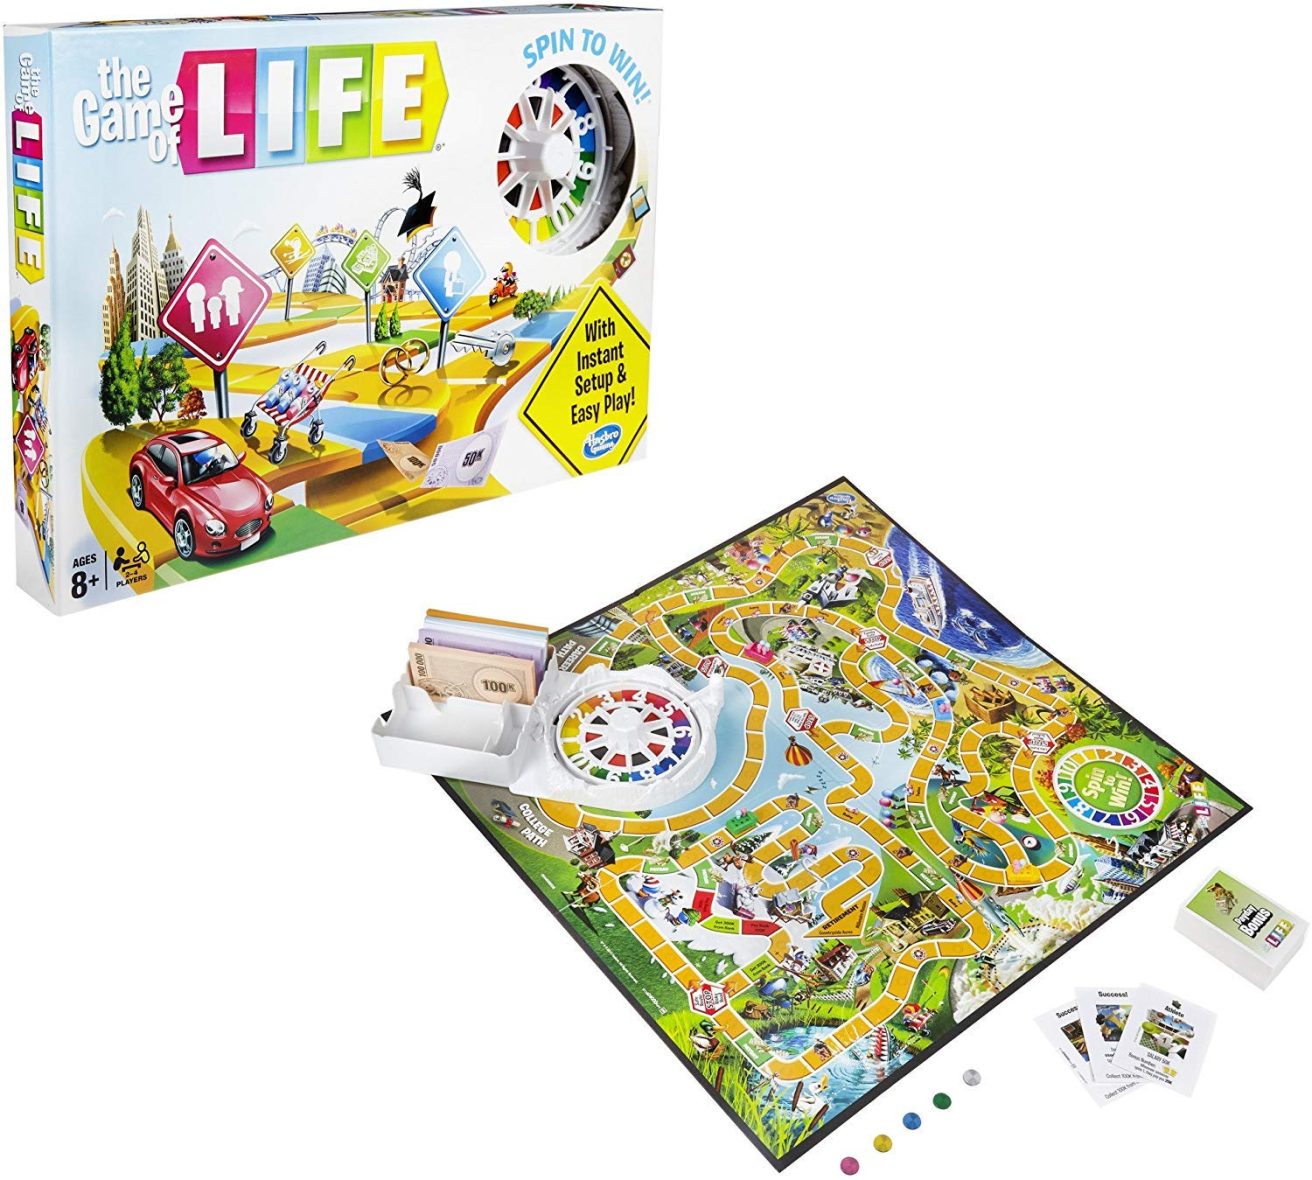 The Game of Life – Board Game